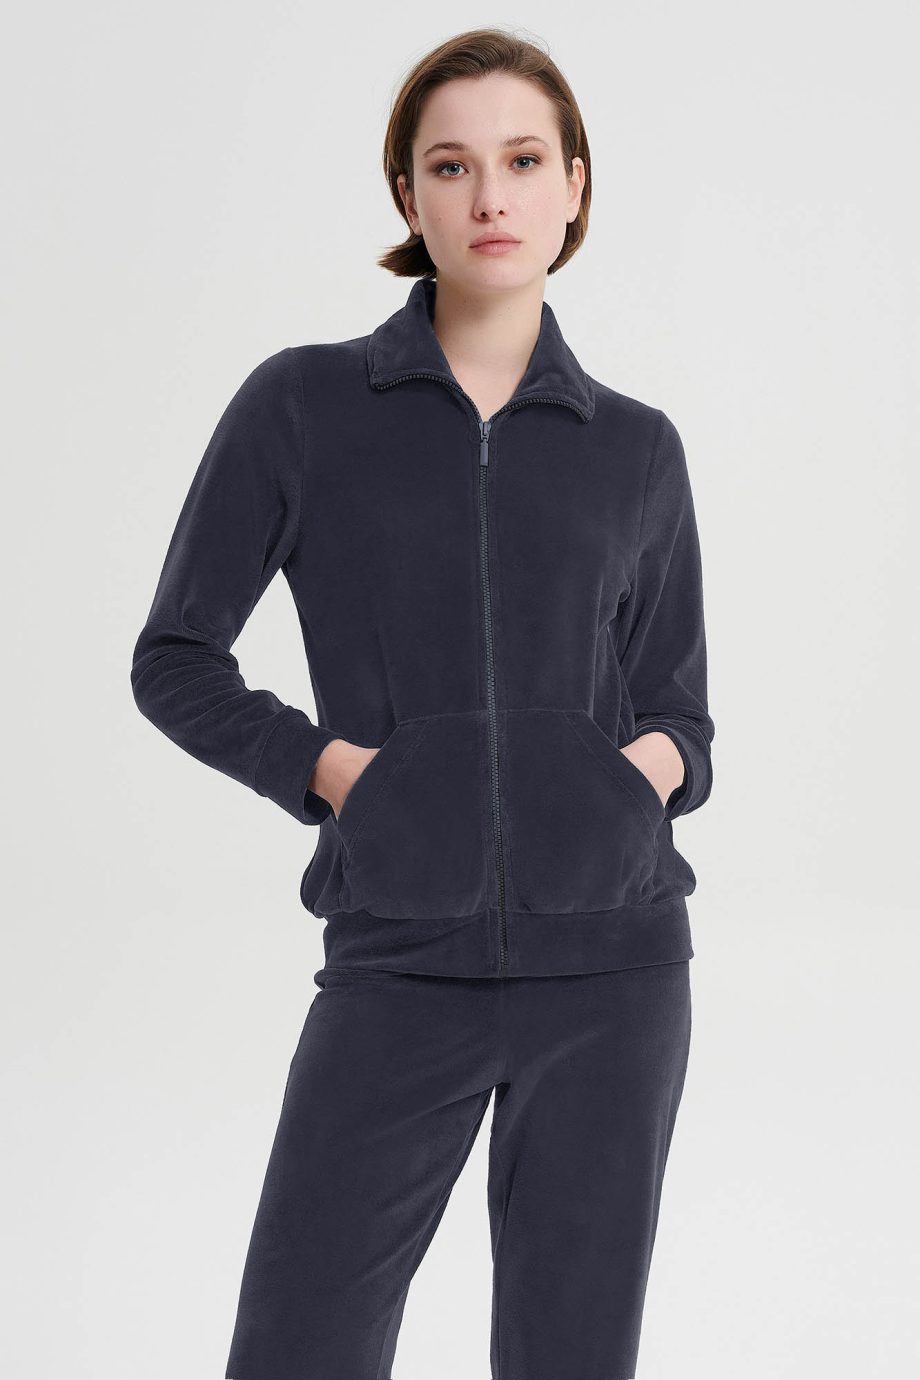 TRACKSUIT 80% COTTON – 20% POLYESTER